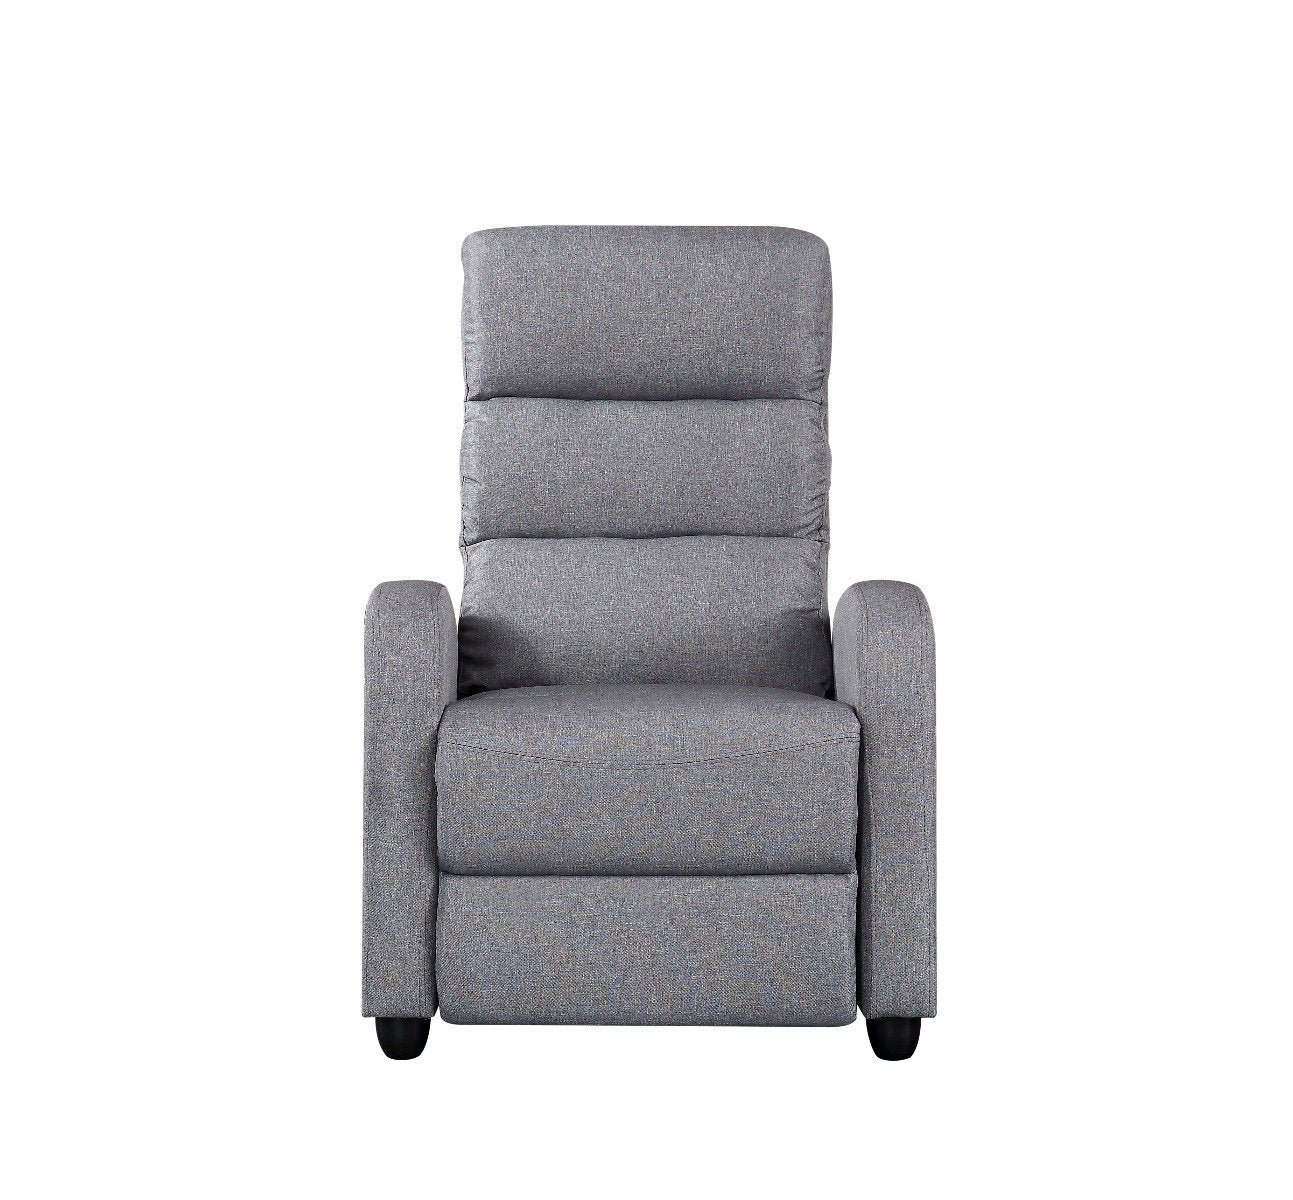 Bar Stools & Chairs Luxury Fabric Recliner Chair - Grey